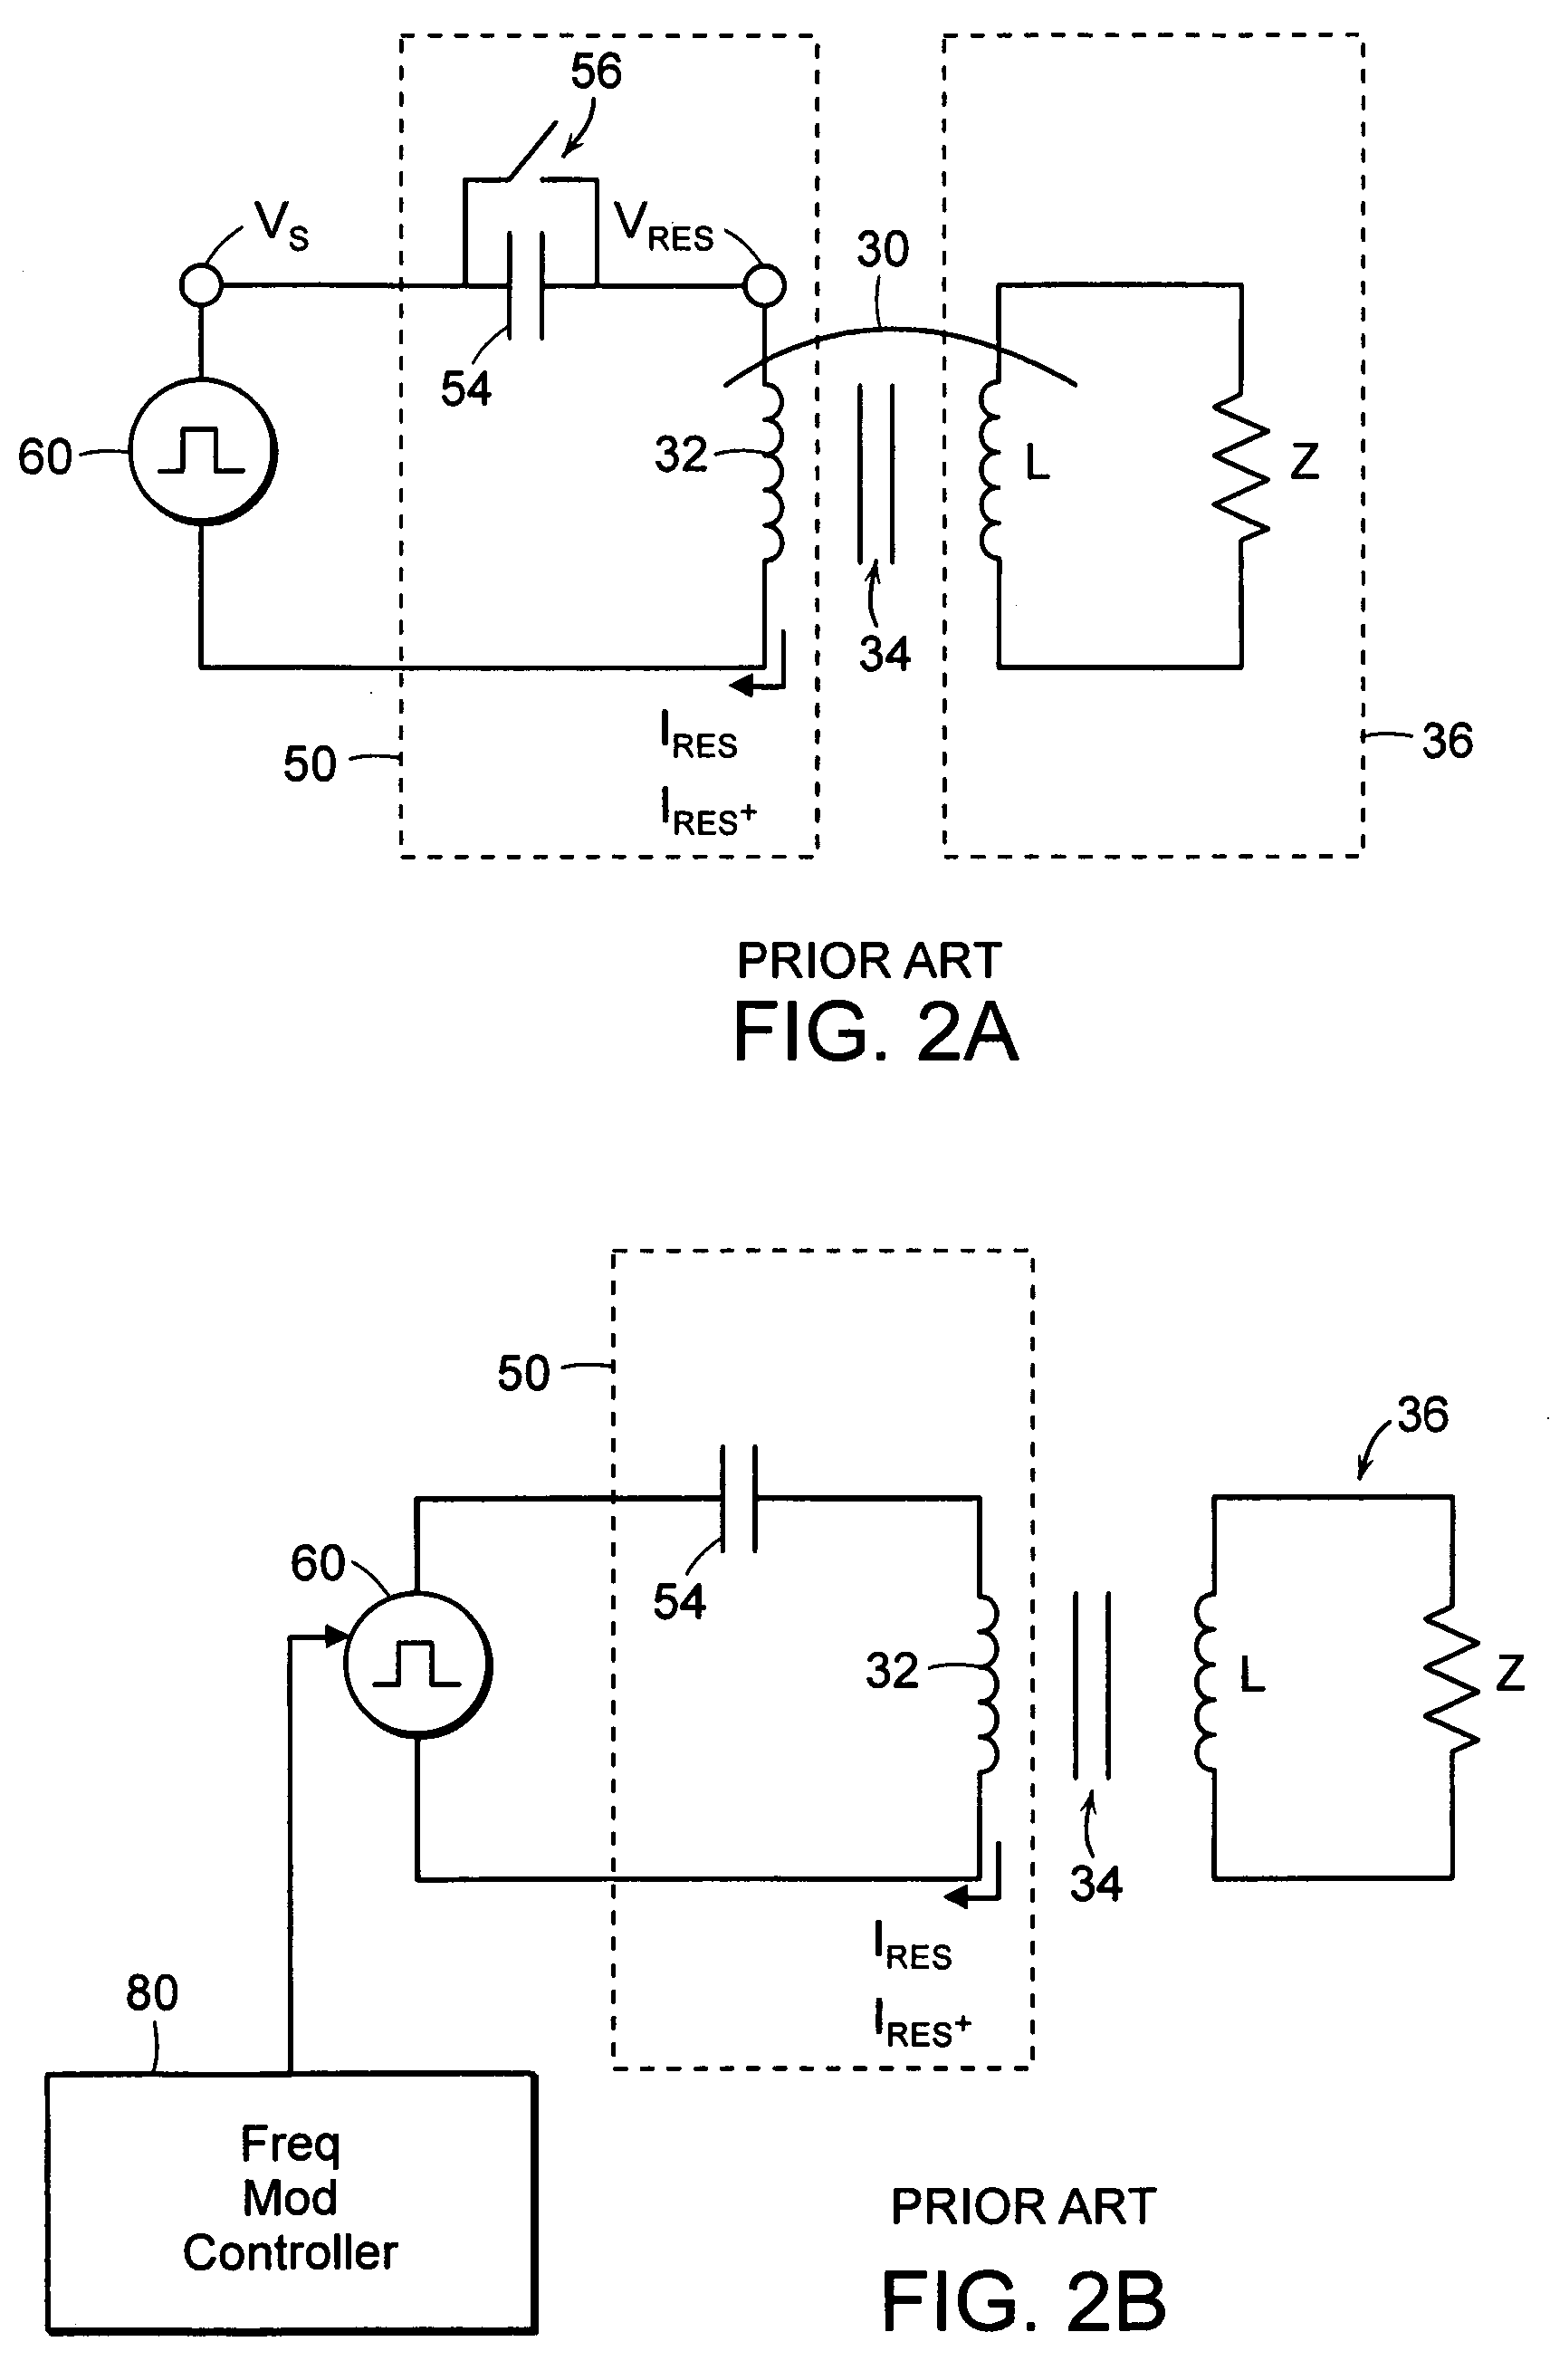 Method and apparatus of providing power to ignite and sustain a plasma in a reactive gas generator